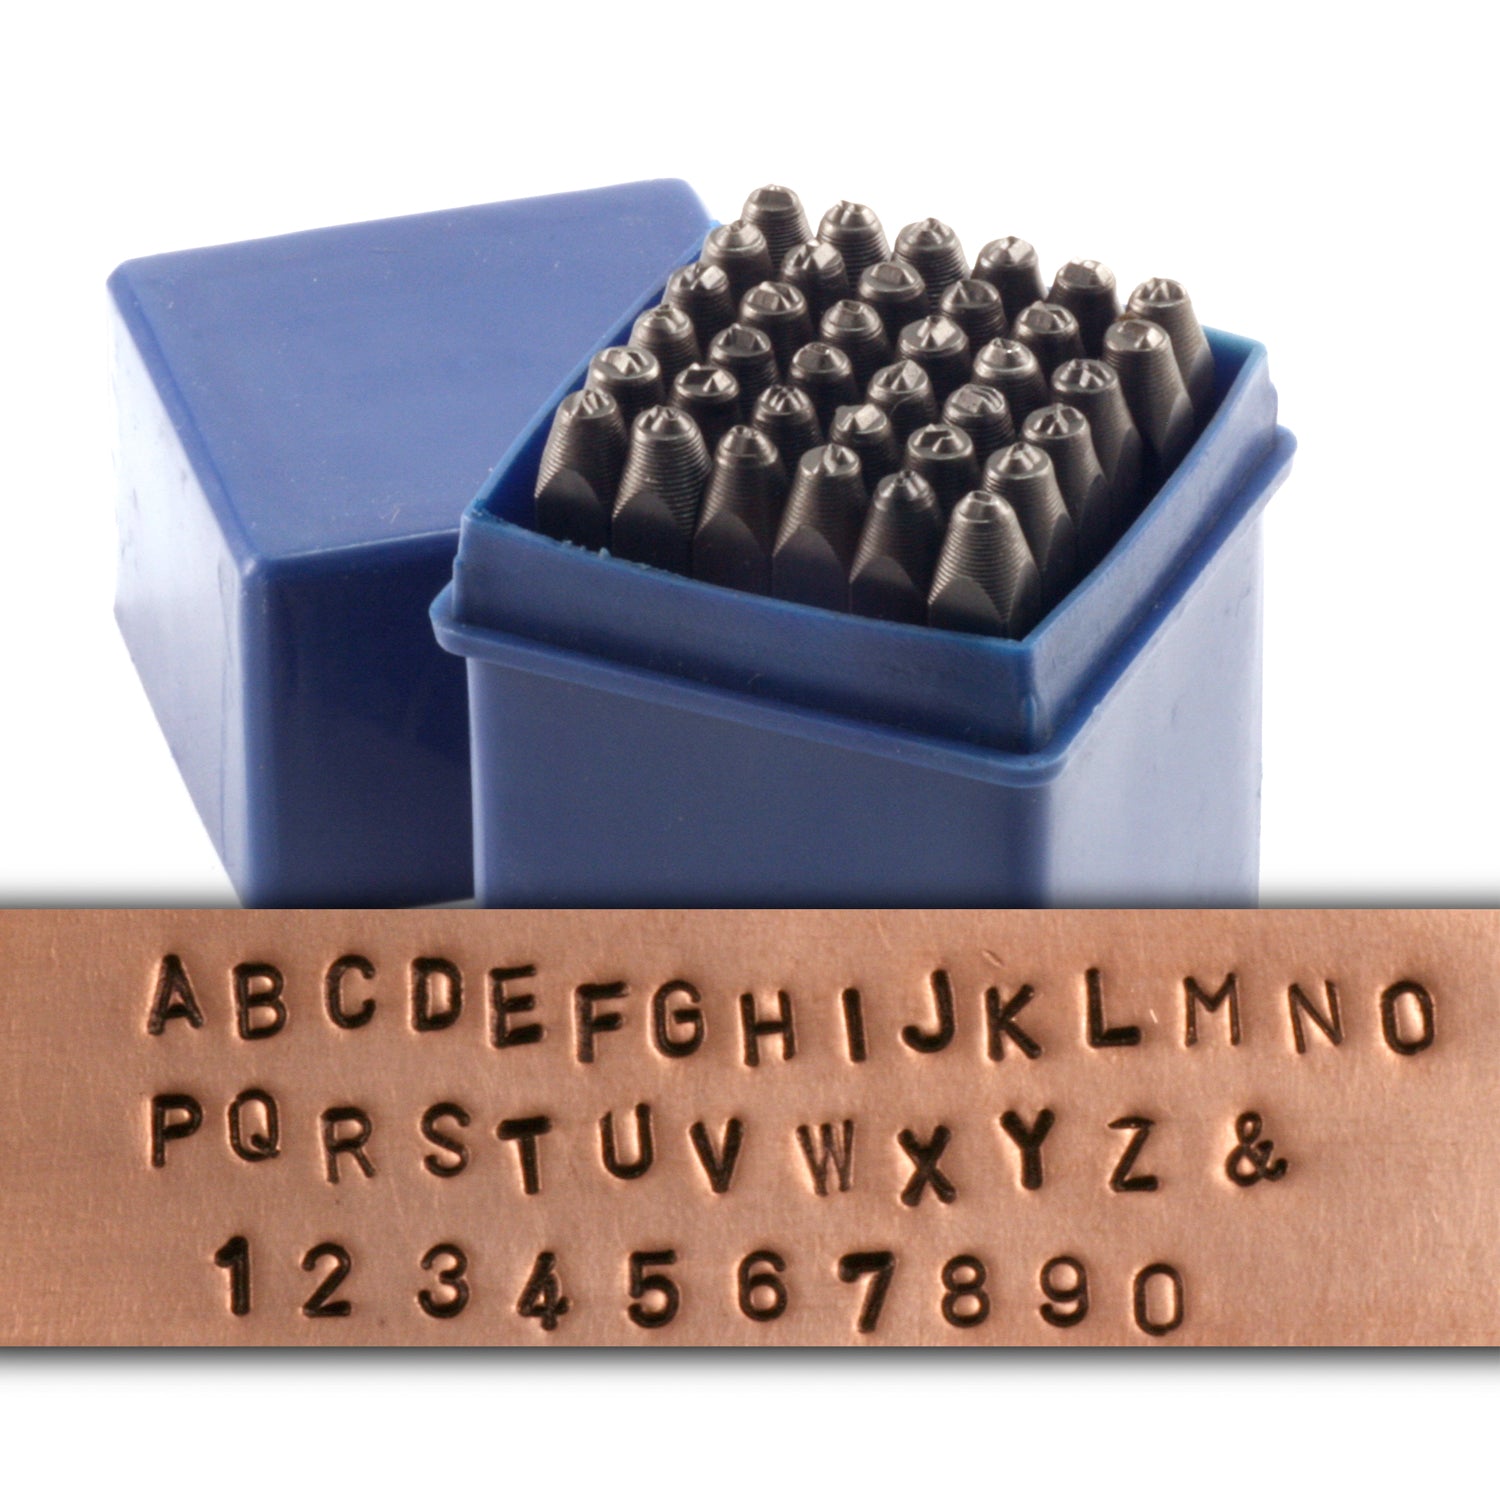 Shop for and Buy USA Made 1/4 Inch Number and Letter Stamp Set at  . Large selection and bulk discounts available.